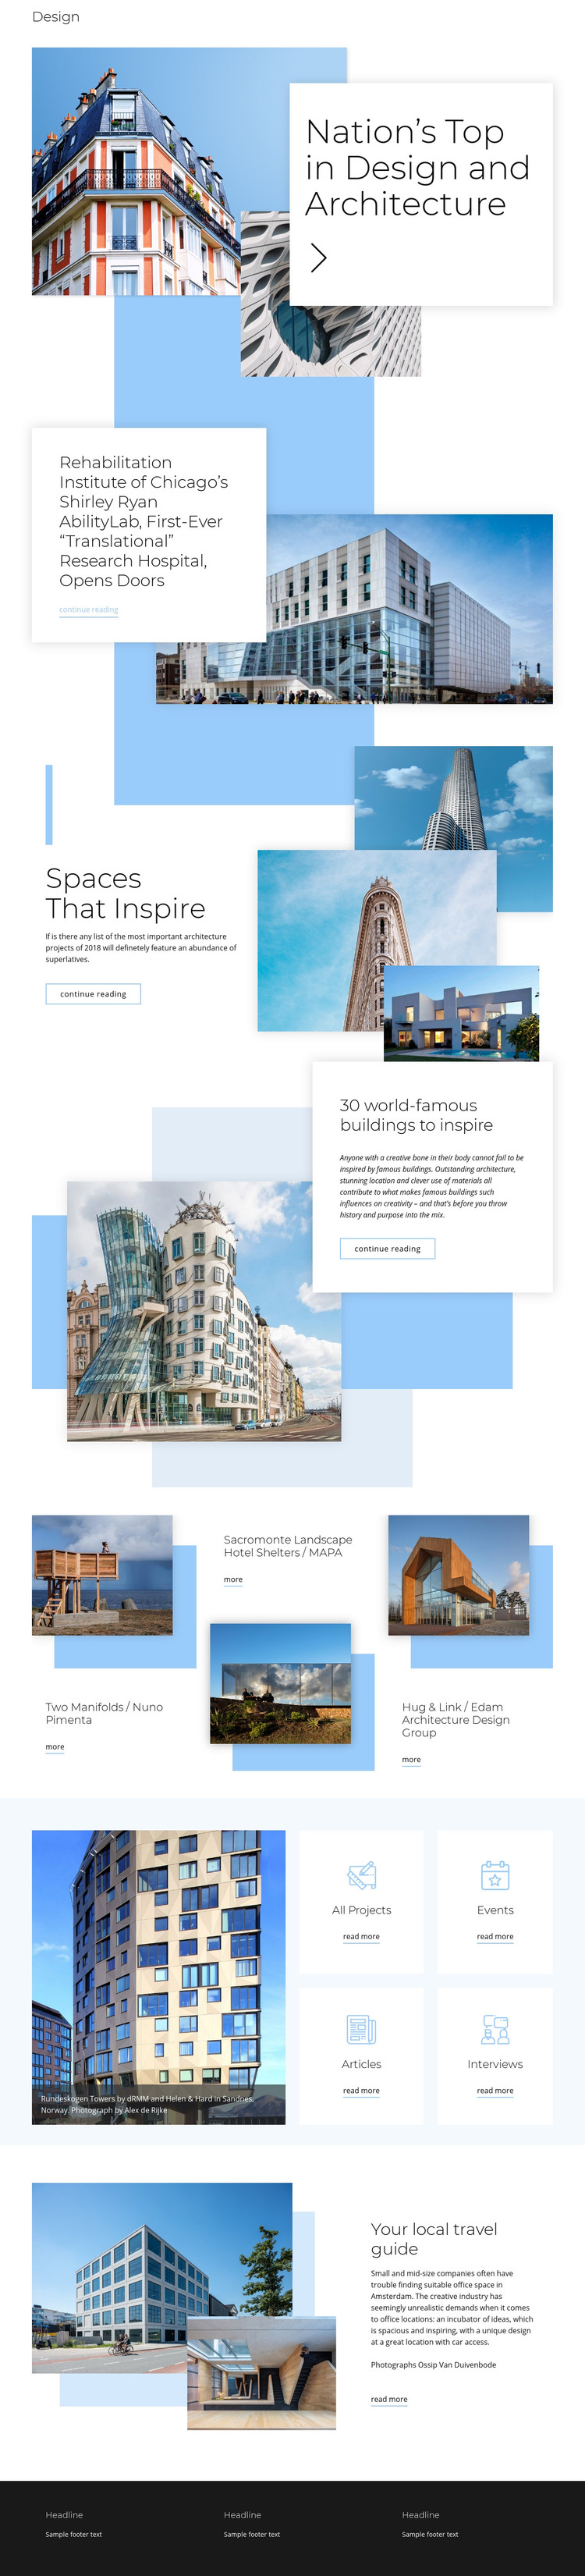 Rating for architecture Homepage Design